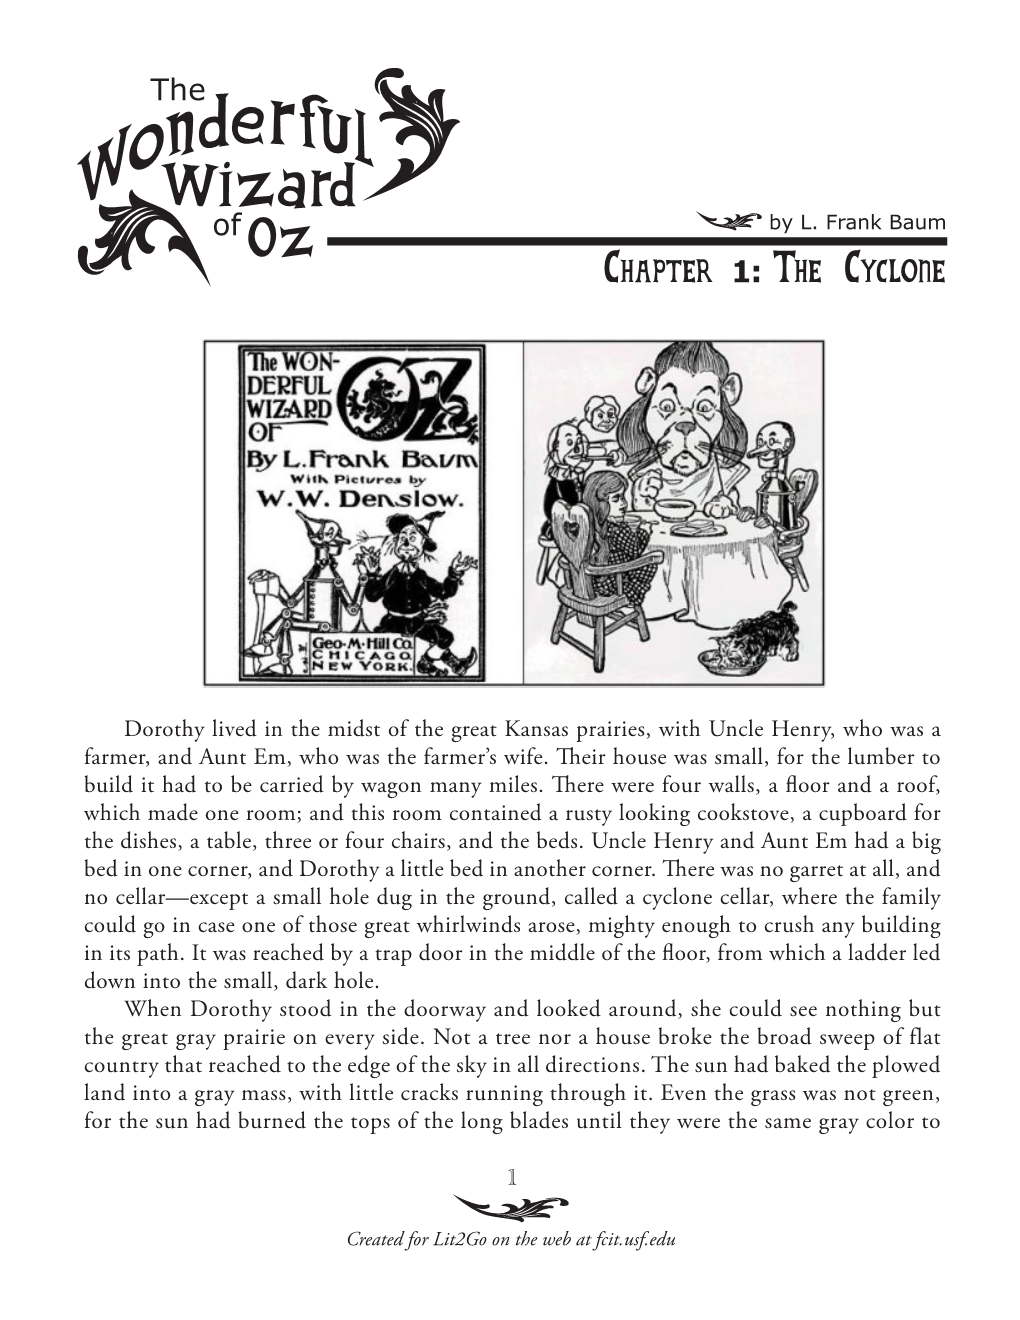 Wonderful Wizard of Oz: Chapter 1 by L